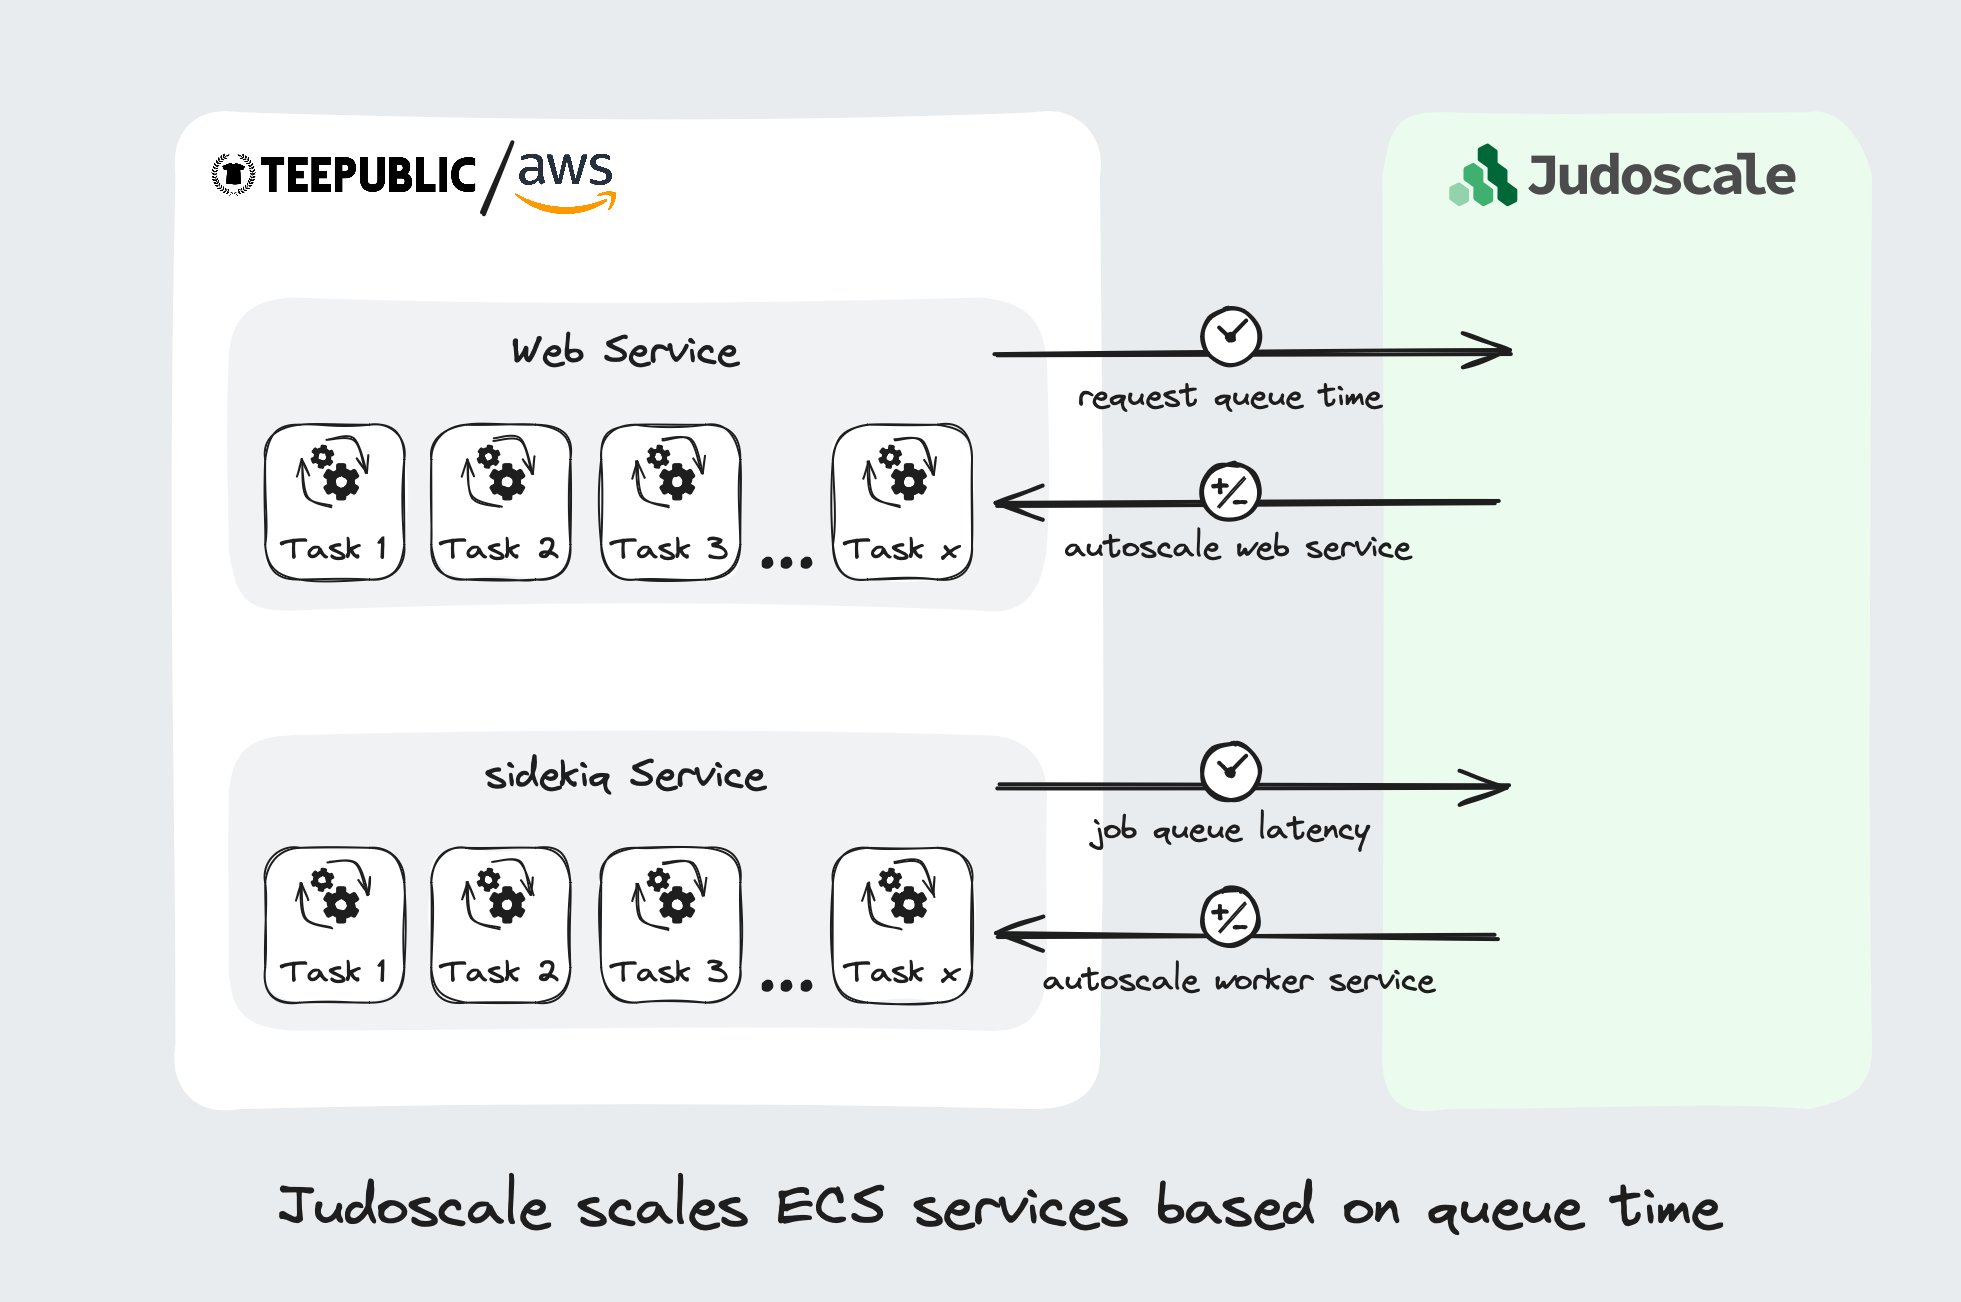 Judoscale scaling ECS services based on queue time